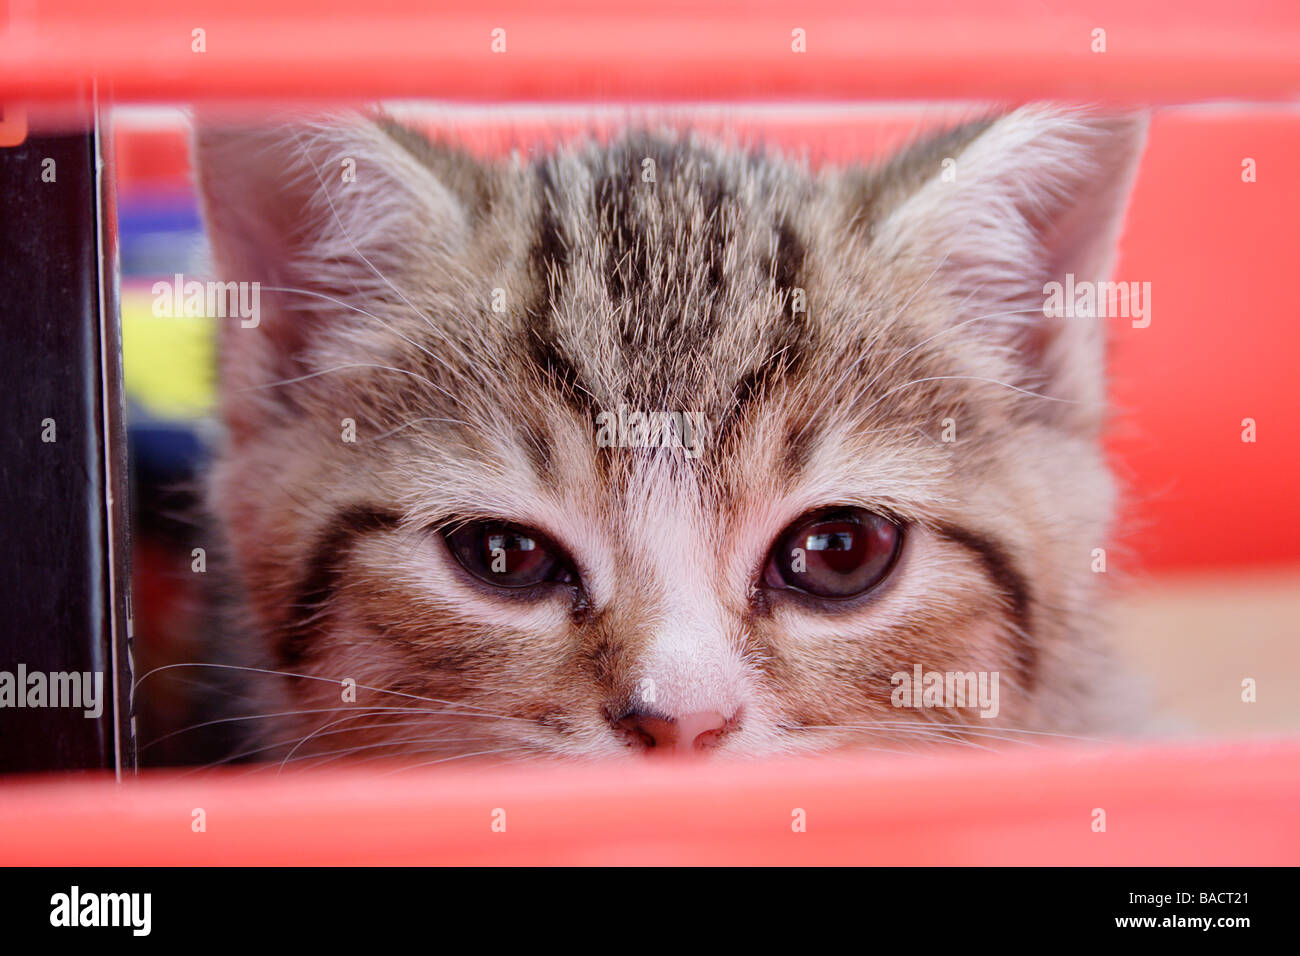 portrait young tabby kitten peering through red box Stock Photo